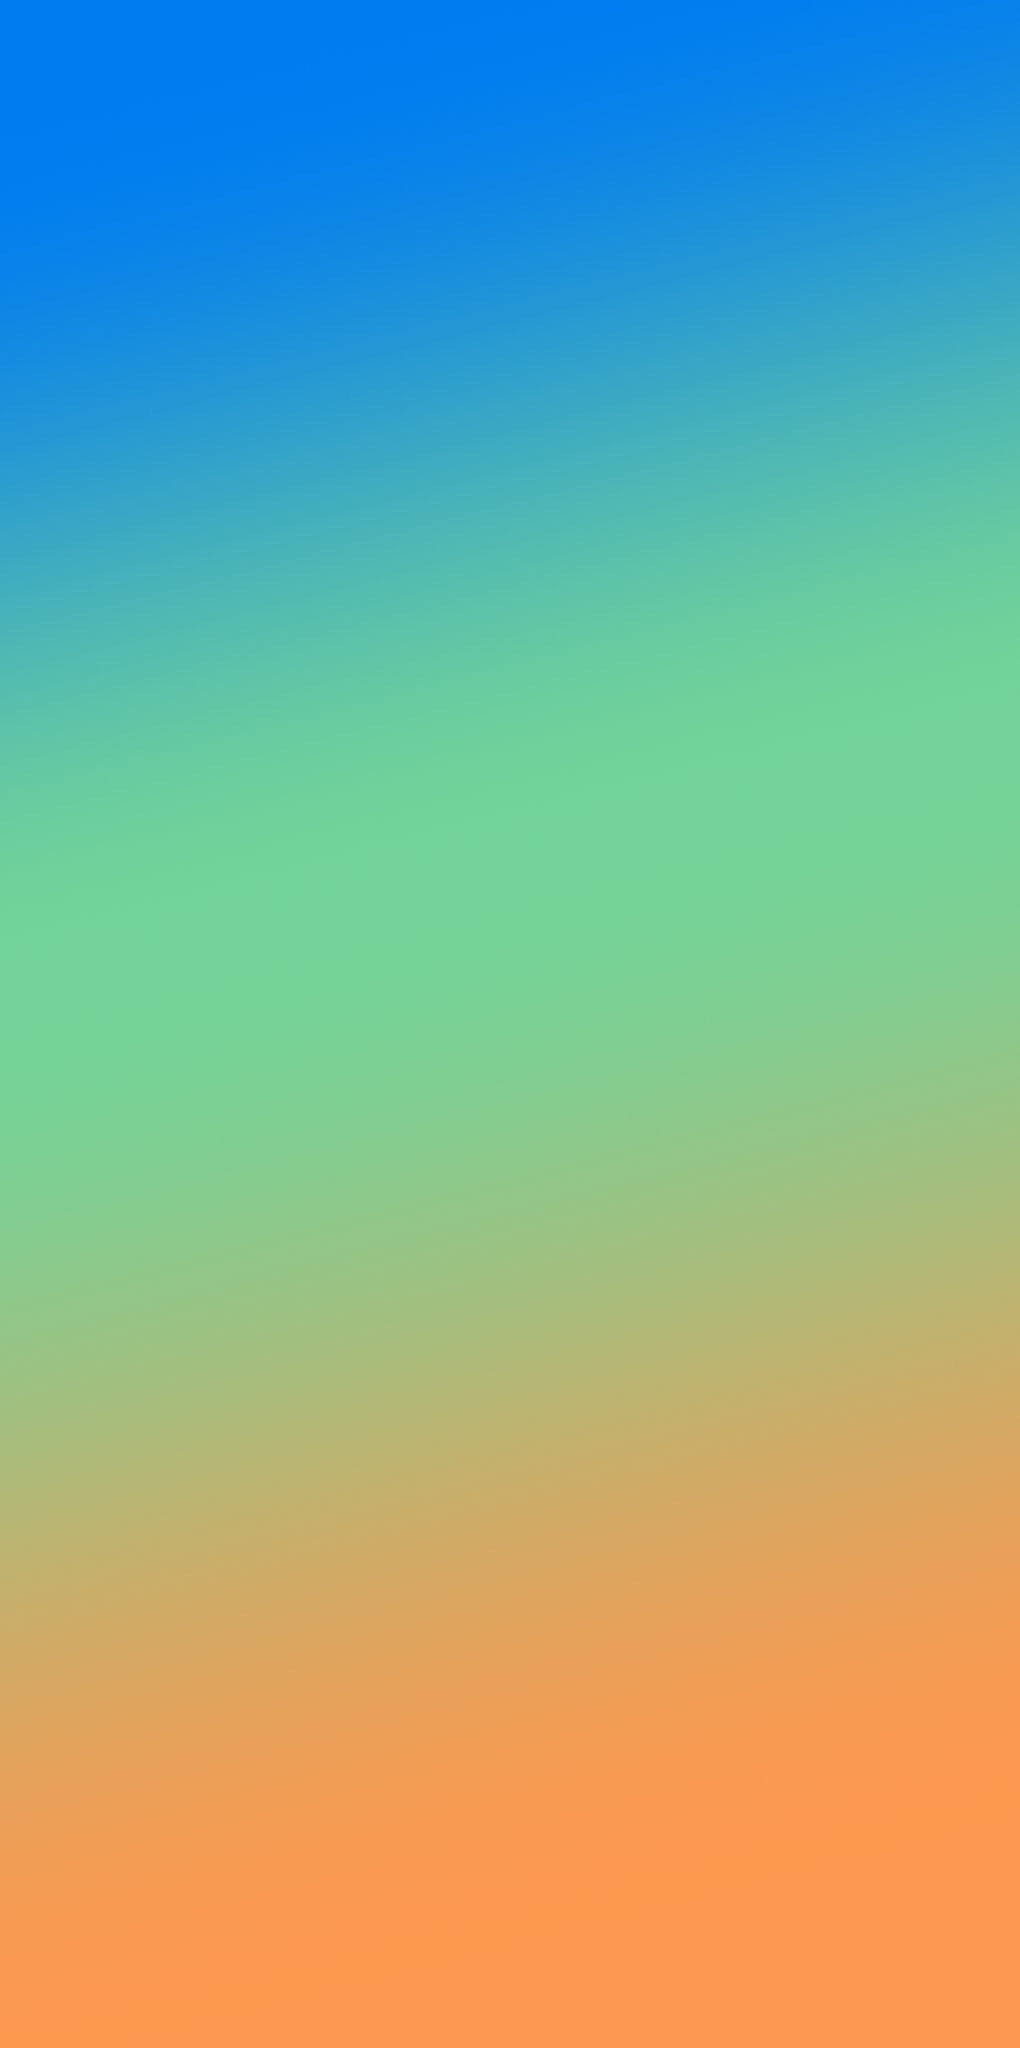 Blue Green Orange Gradient wallpaper for Apple iPhone, Mac, iPad and more